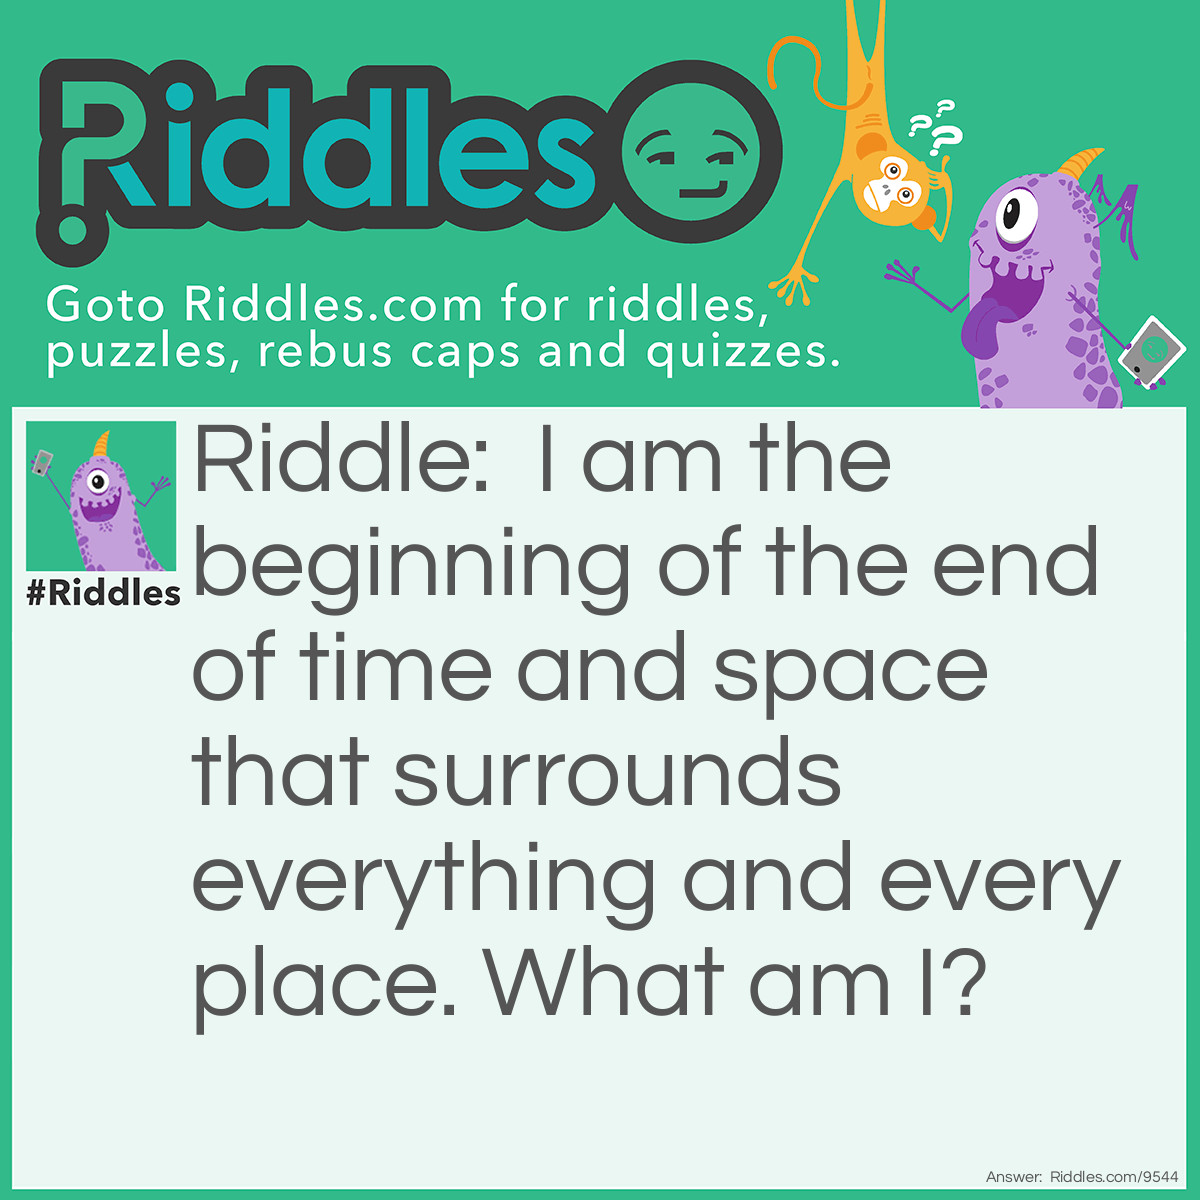 Riddle: I am the beginning of the end of time and space that surrounds everything and every place. What am I? Answer: The letter E.